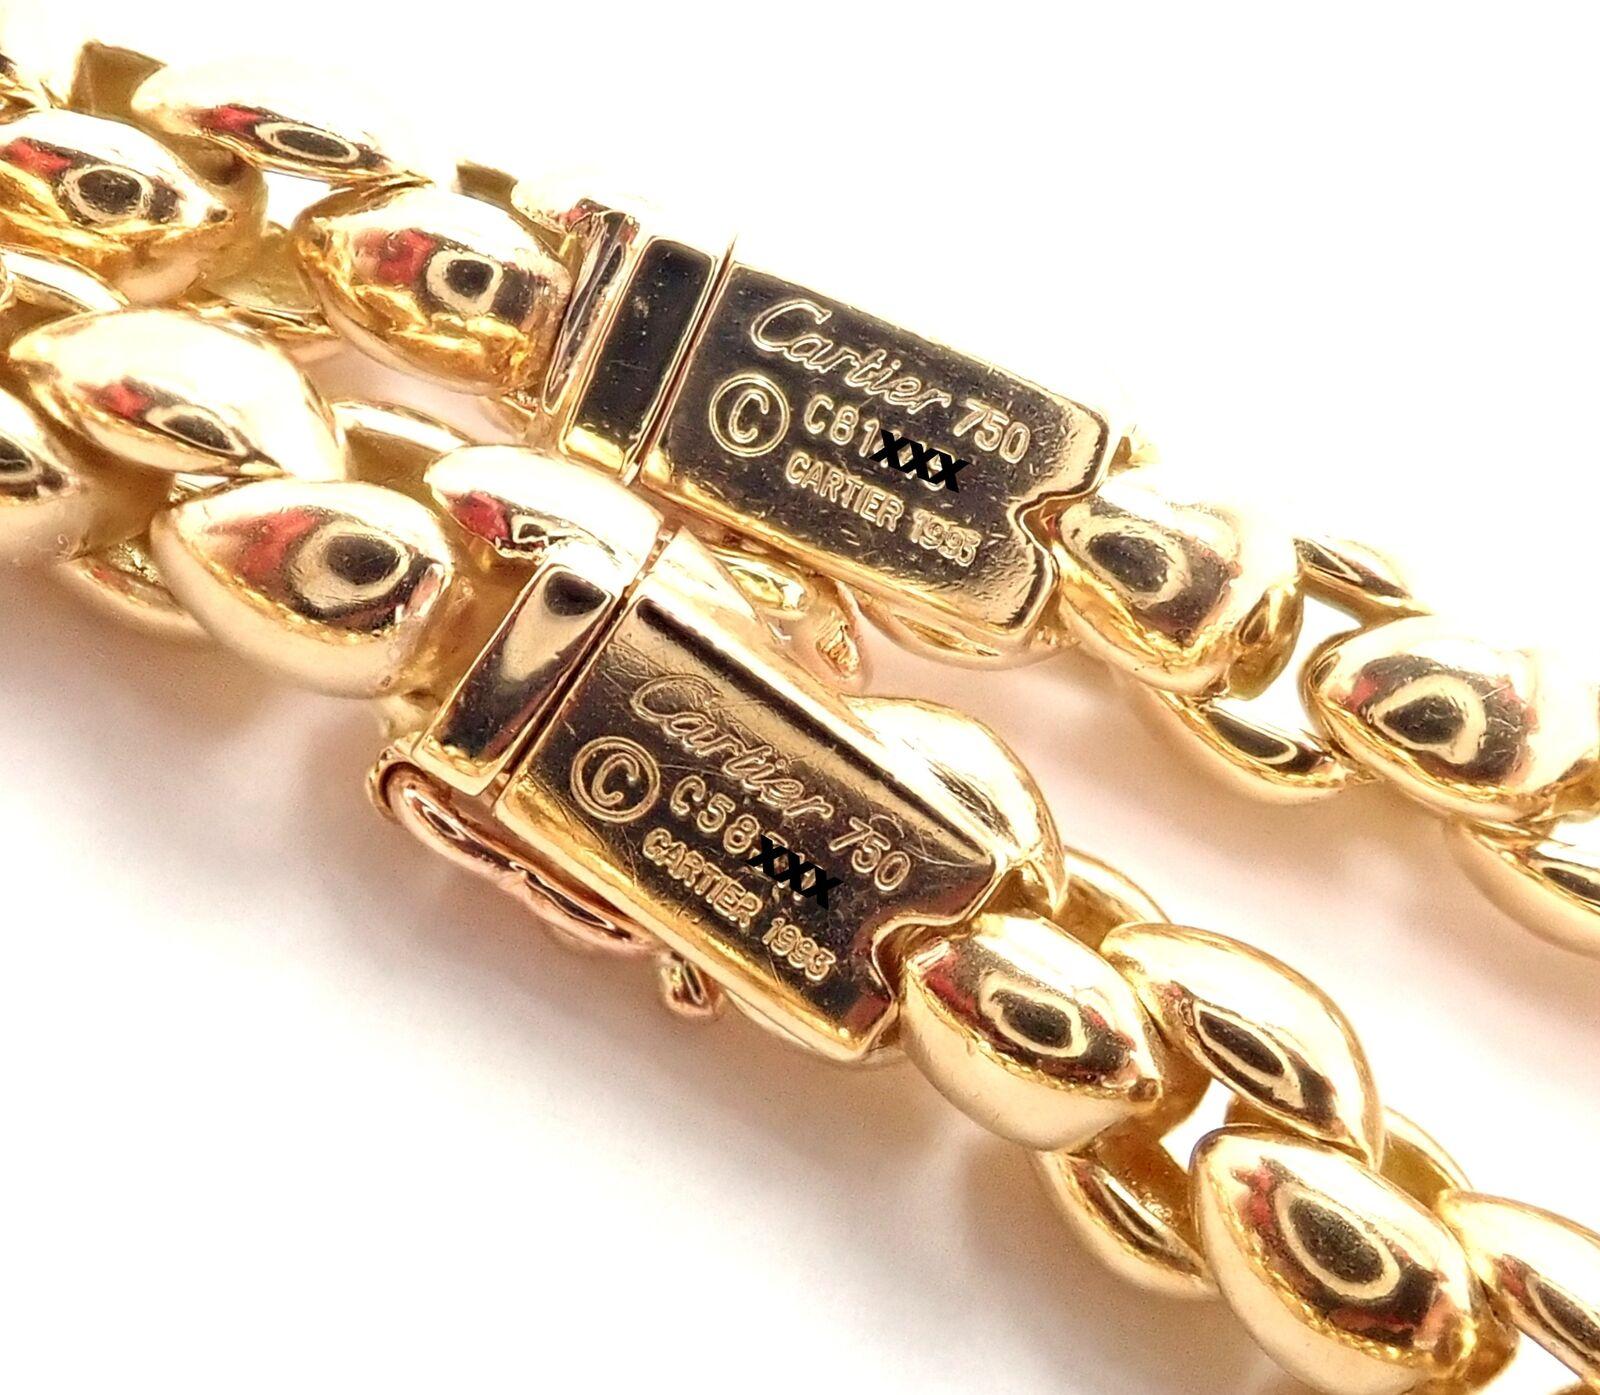 Cartier Vintage Link Chain Necklace and Bracelet Set In Excellent Condition For Sale In Holland, PA